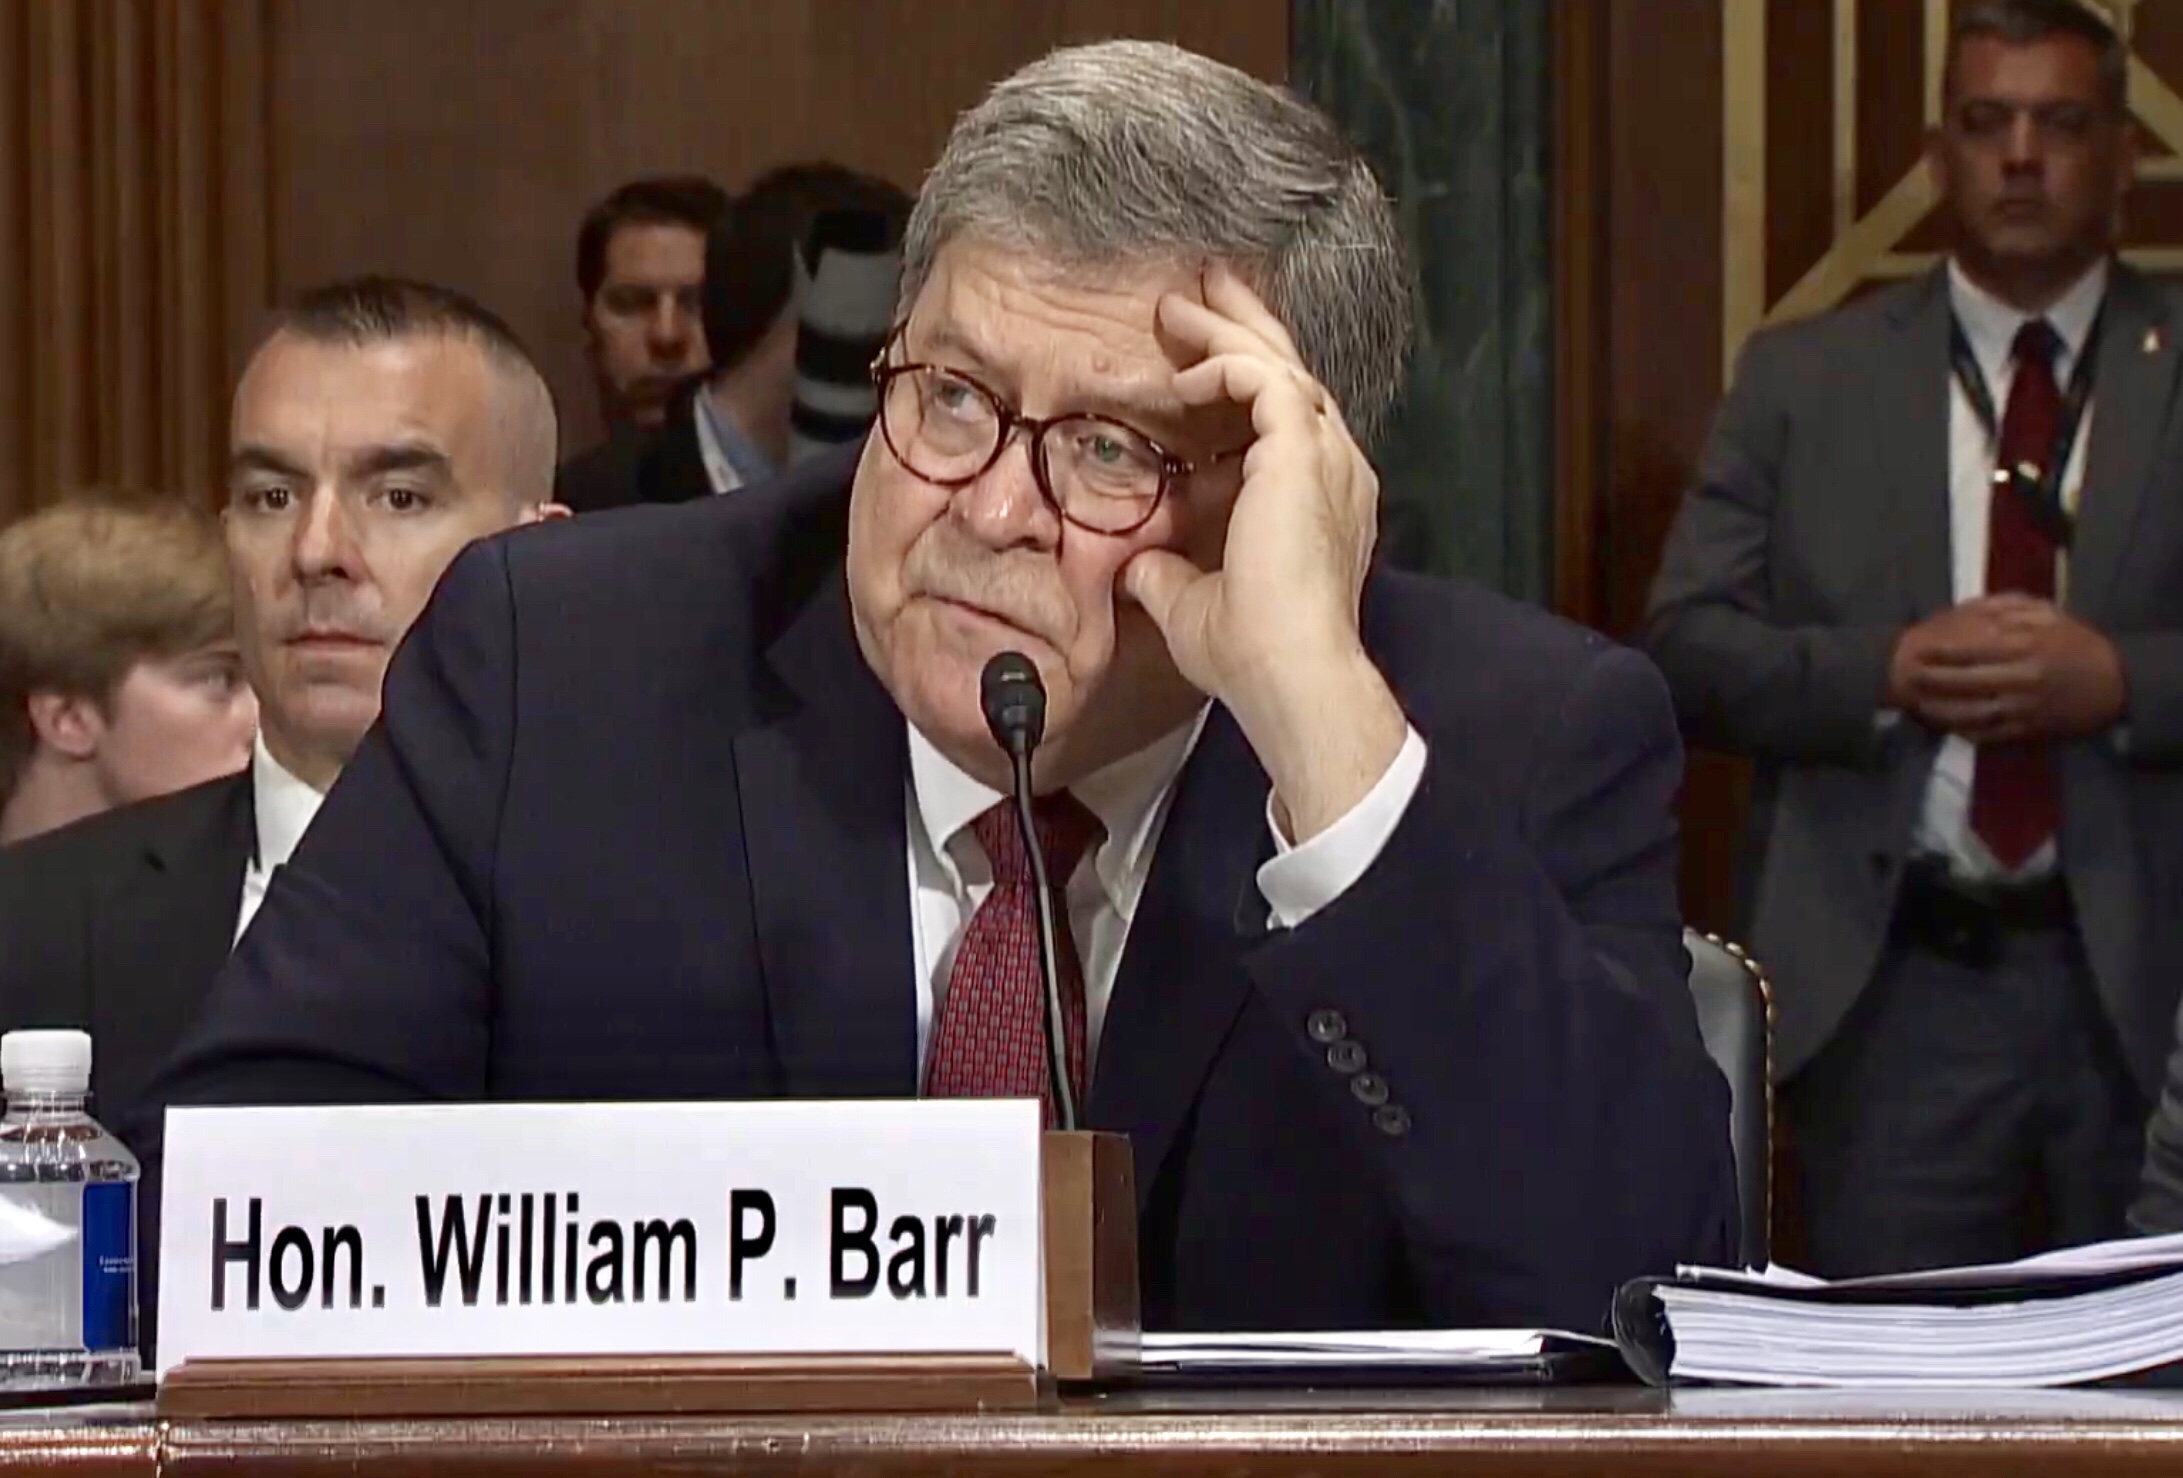 Exit, Pursued by a Barr